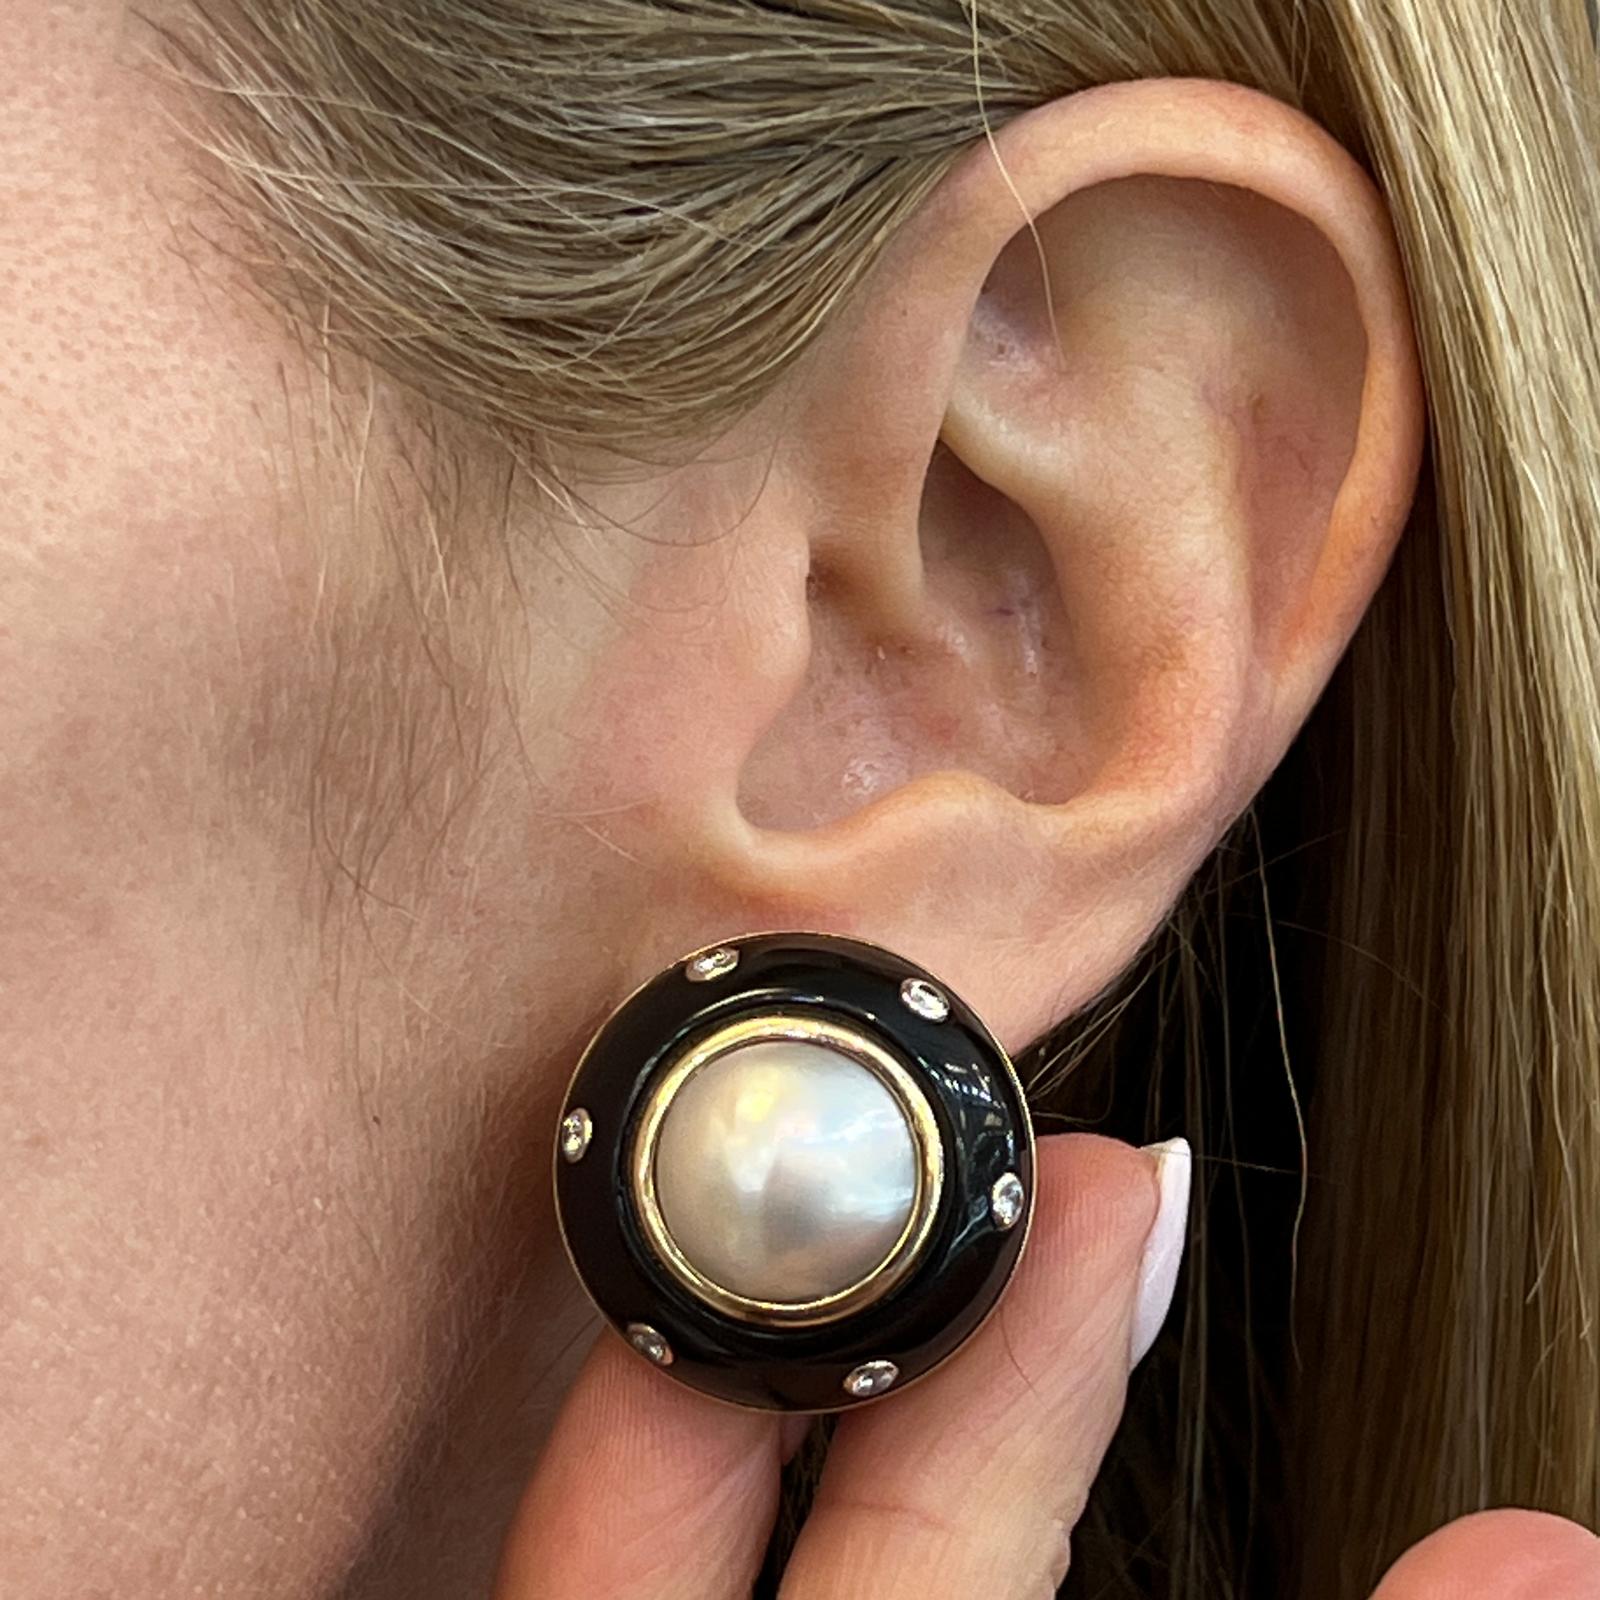 Circular-shaped cabochon earrings, each earring centering a larger mabe pearl with 12 round-cut diamond accents, in 14k yellow gold, and stamped Trianon. The earrings measure 1.0 inch in diameter. 